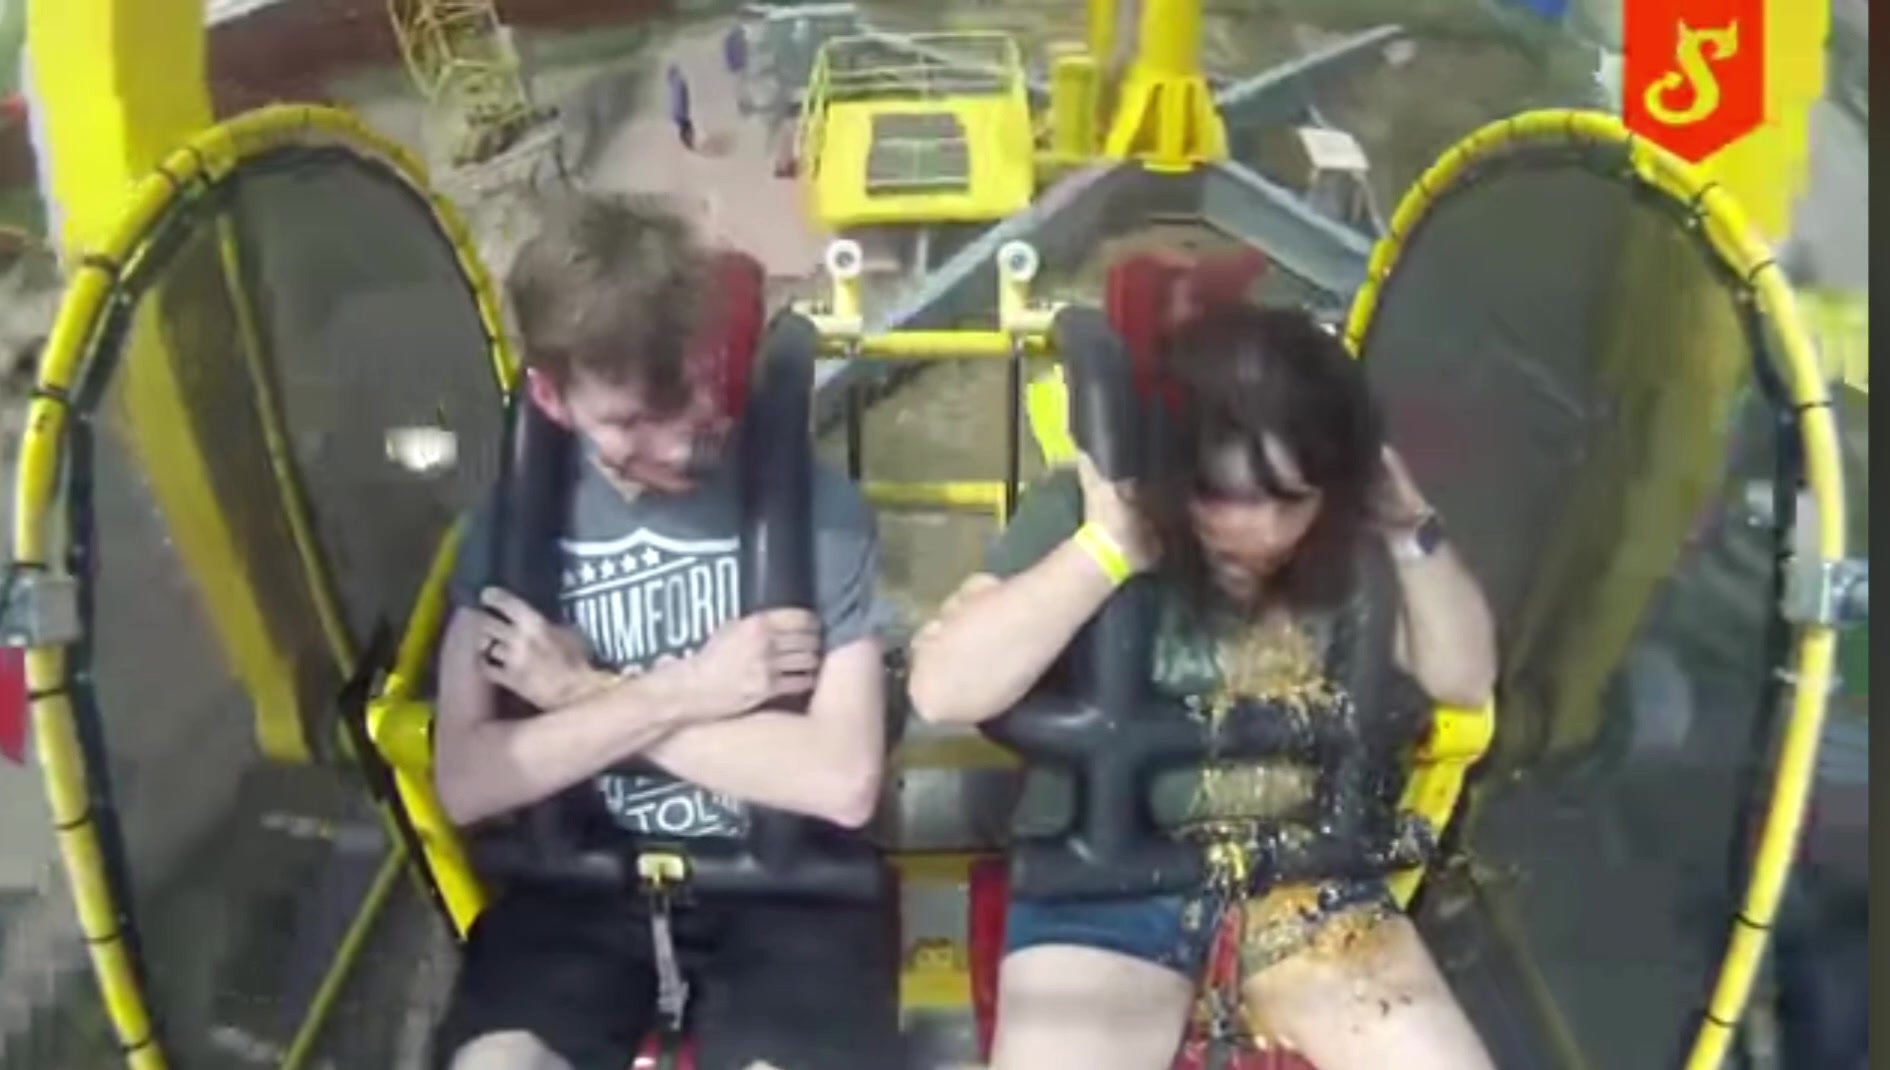 Chubby girl puking on a ride